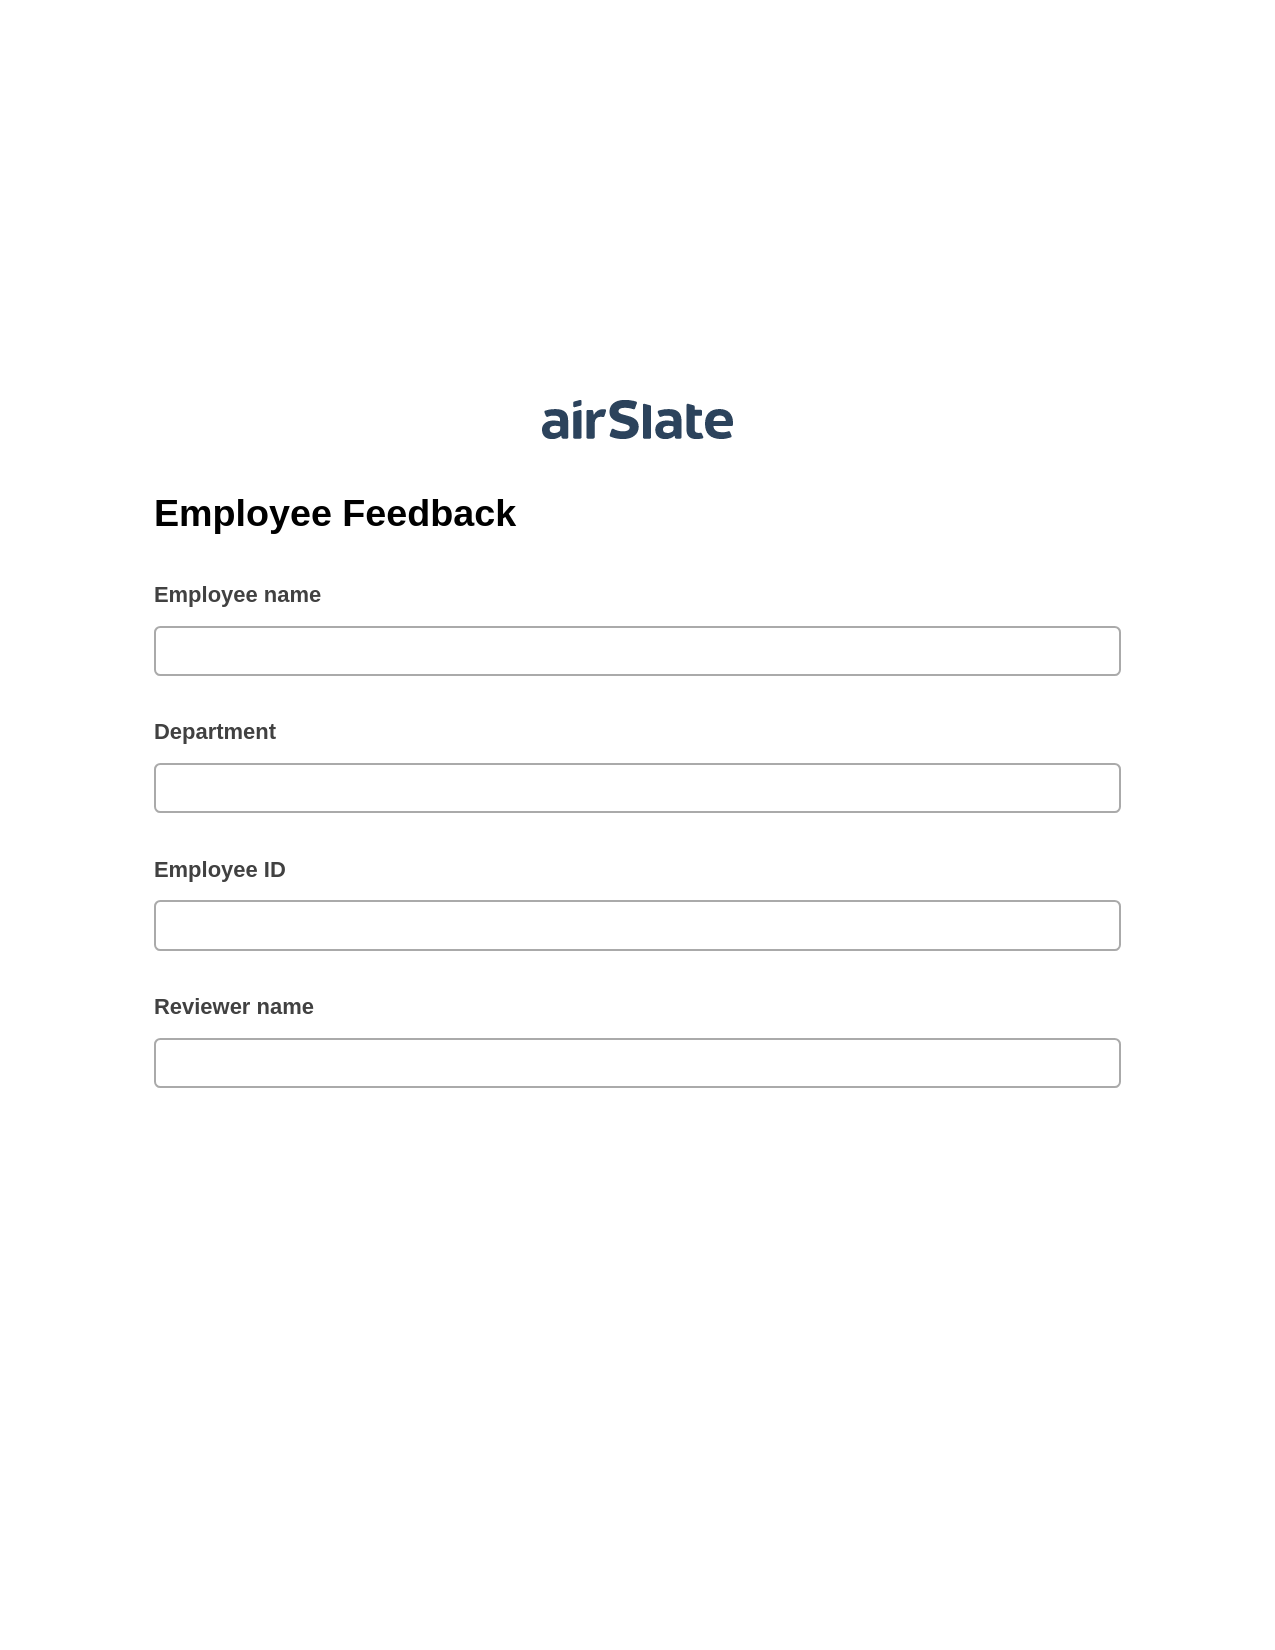 Employee Feedback Pre-fill Dropdown from Airtable, Audit Trail Bot, Export to Excel 365 Bot